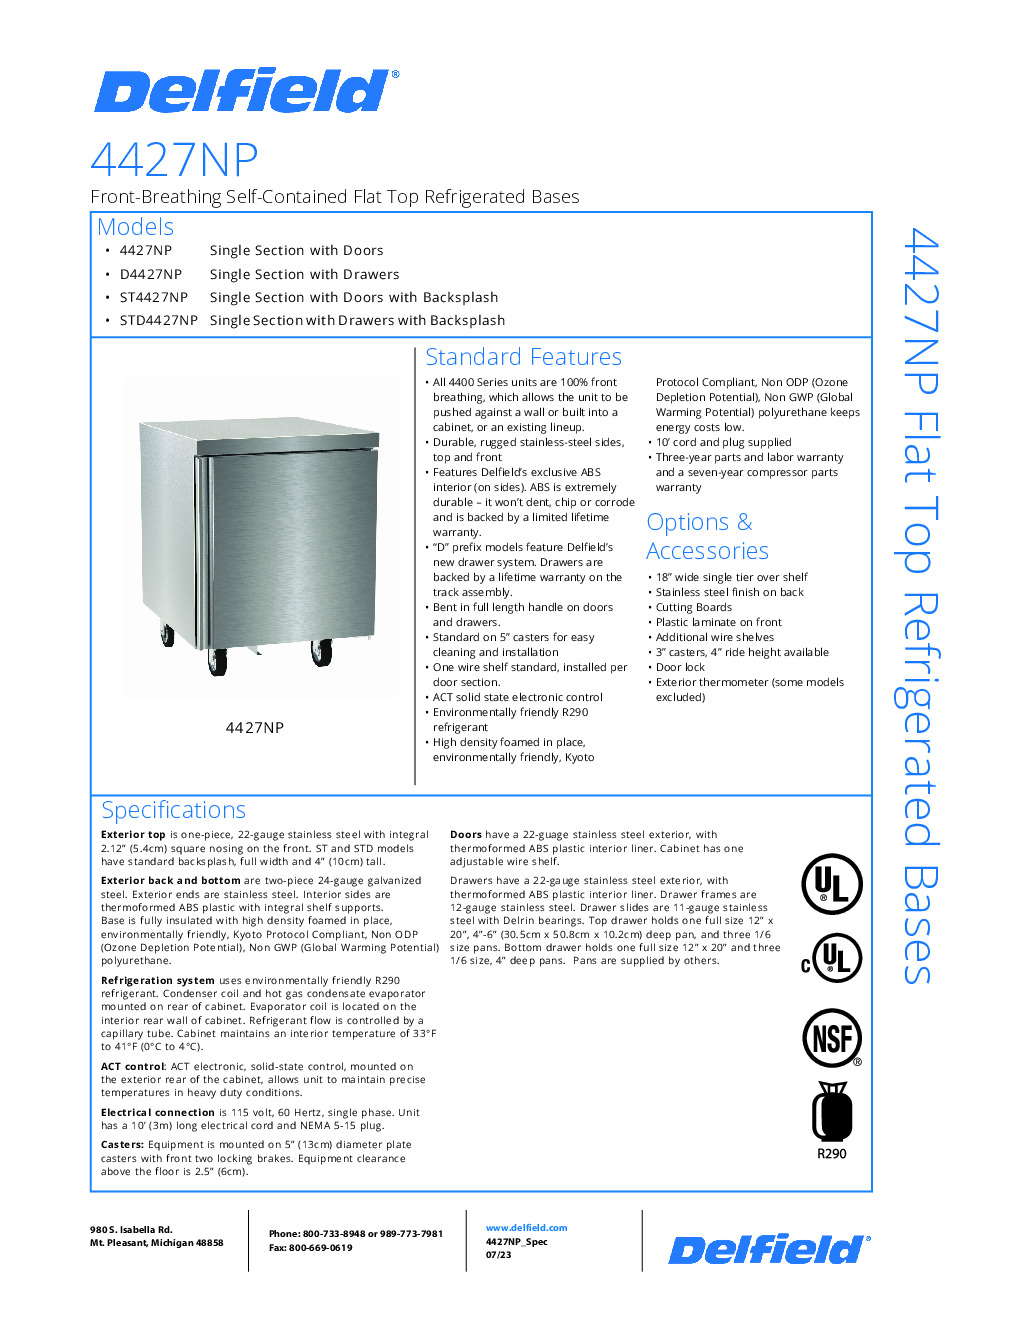 Delfield 4427NP Work Top Refrigerated Counter